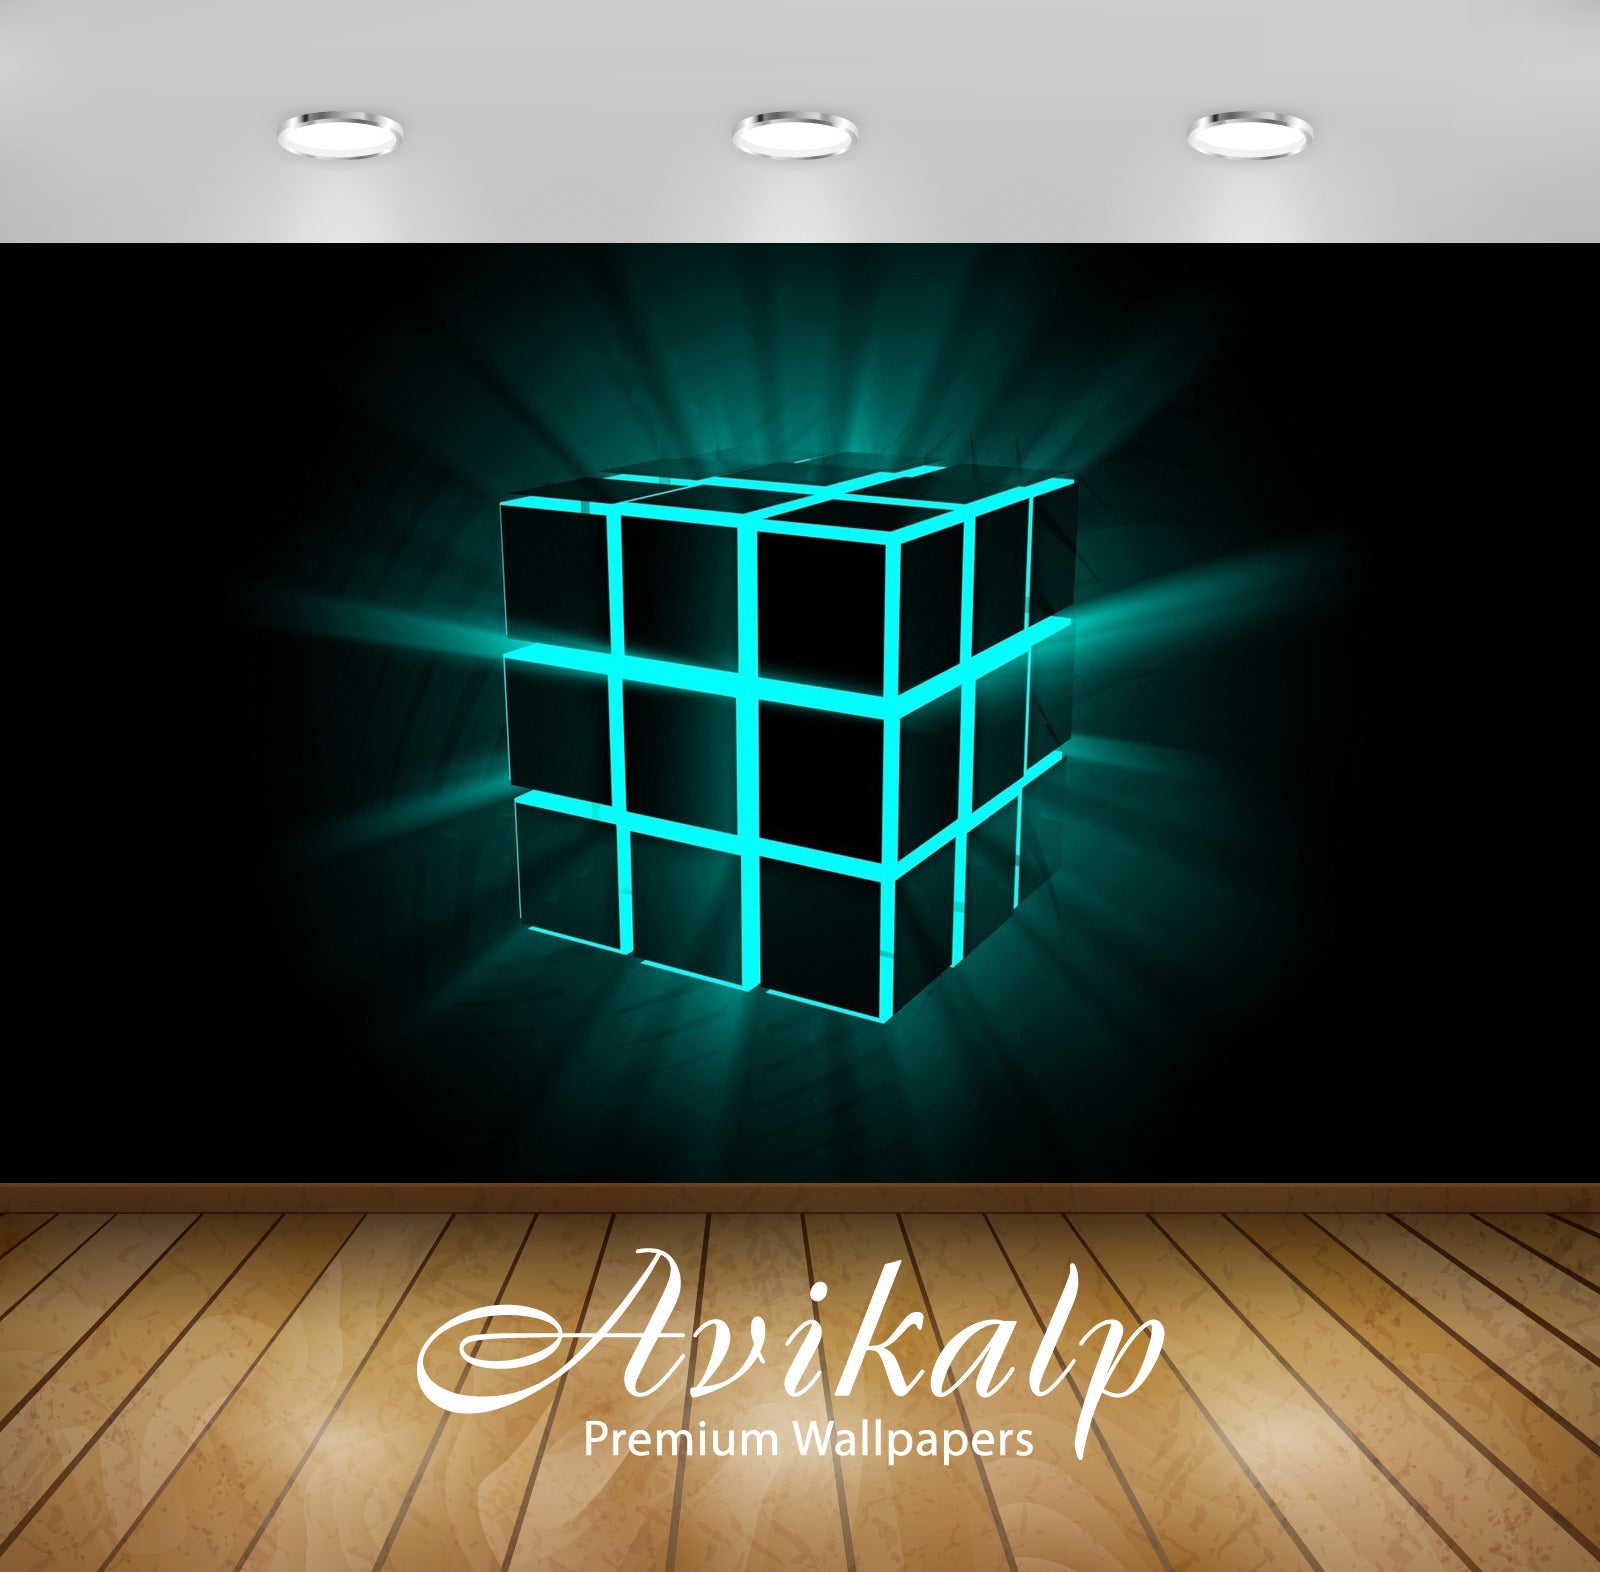 Avikalp Exclusive Awi3818 Neon Cube Full HD Wallpapers for Living room, Hall, Kids Room, Kitchen, TV